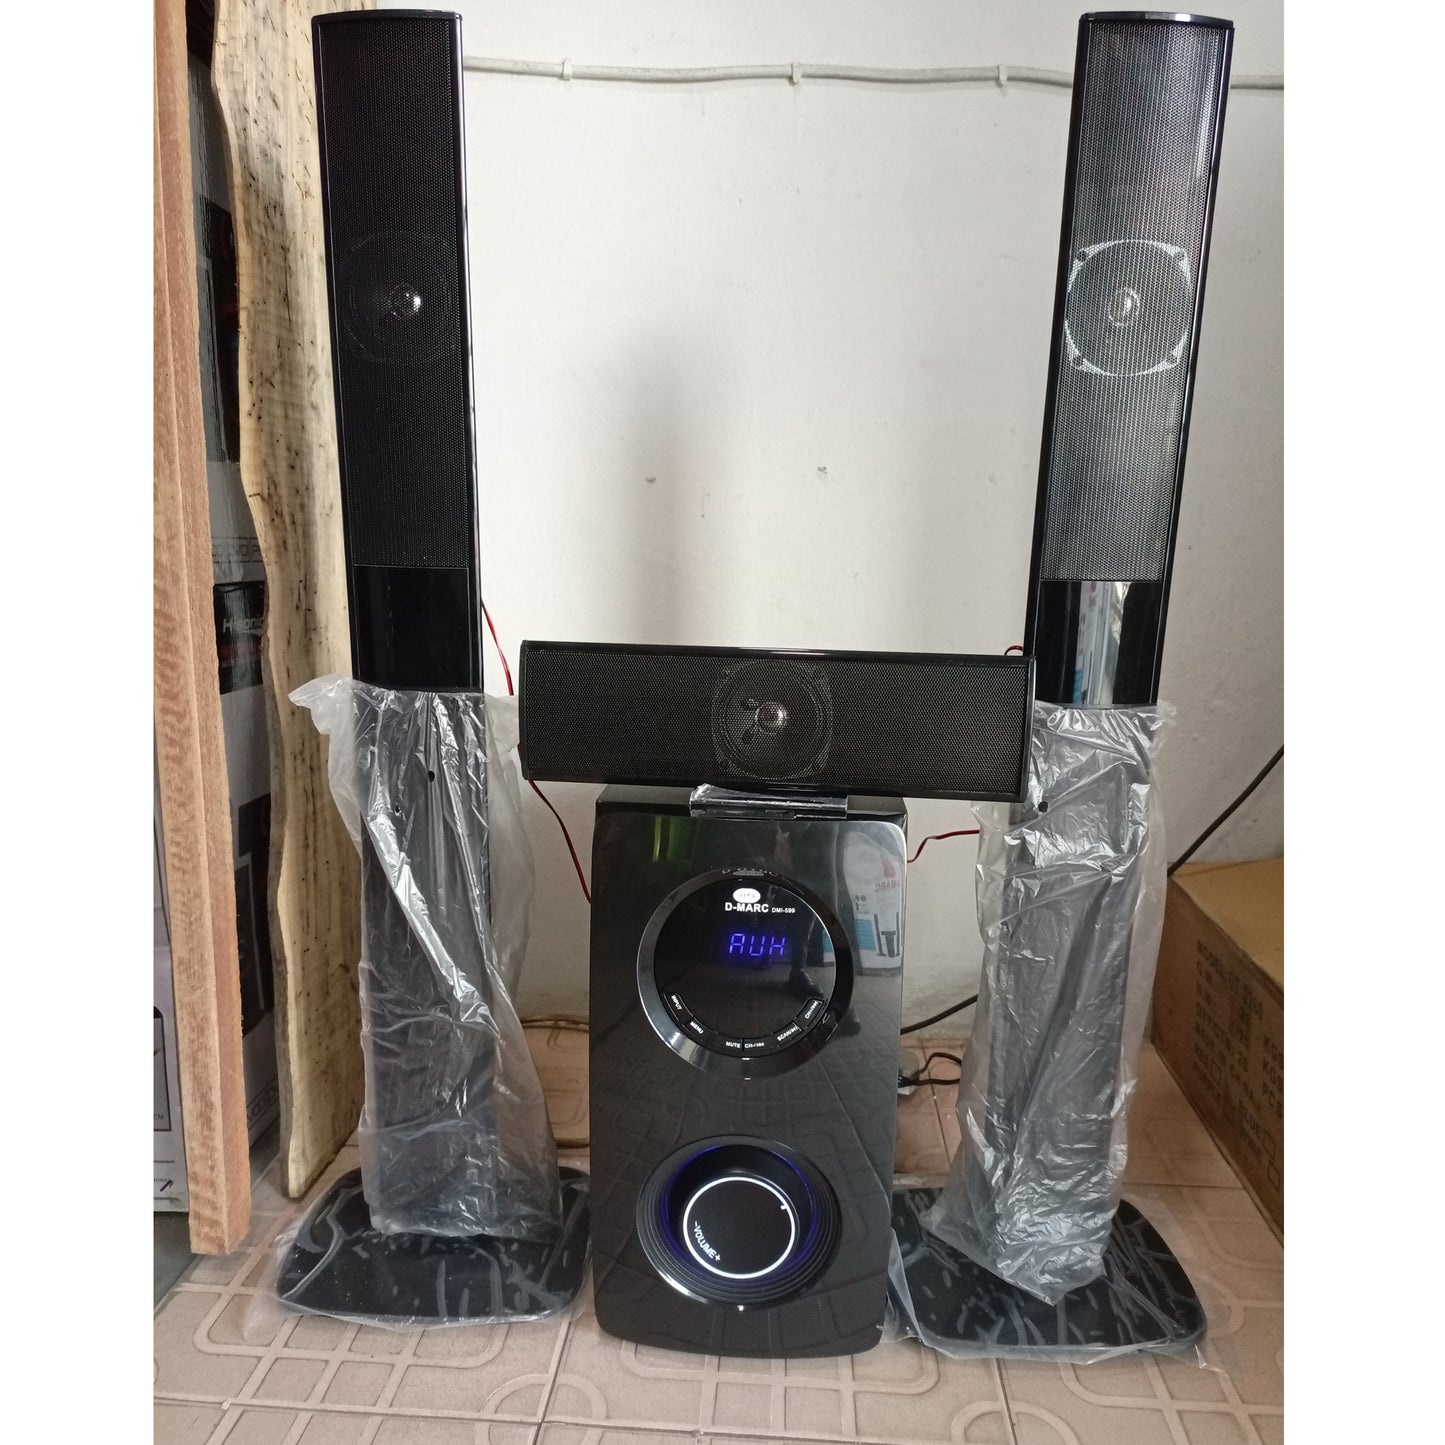 3.1ch Standing D-marc home theater with Bluetooth, USB, SD, FM and Aux